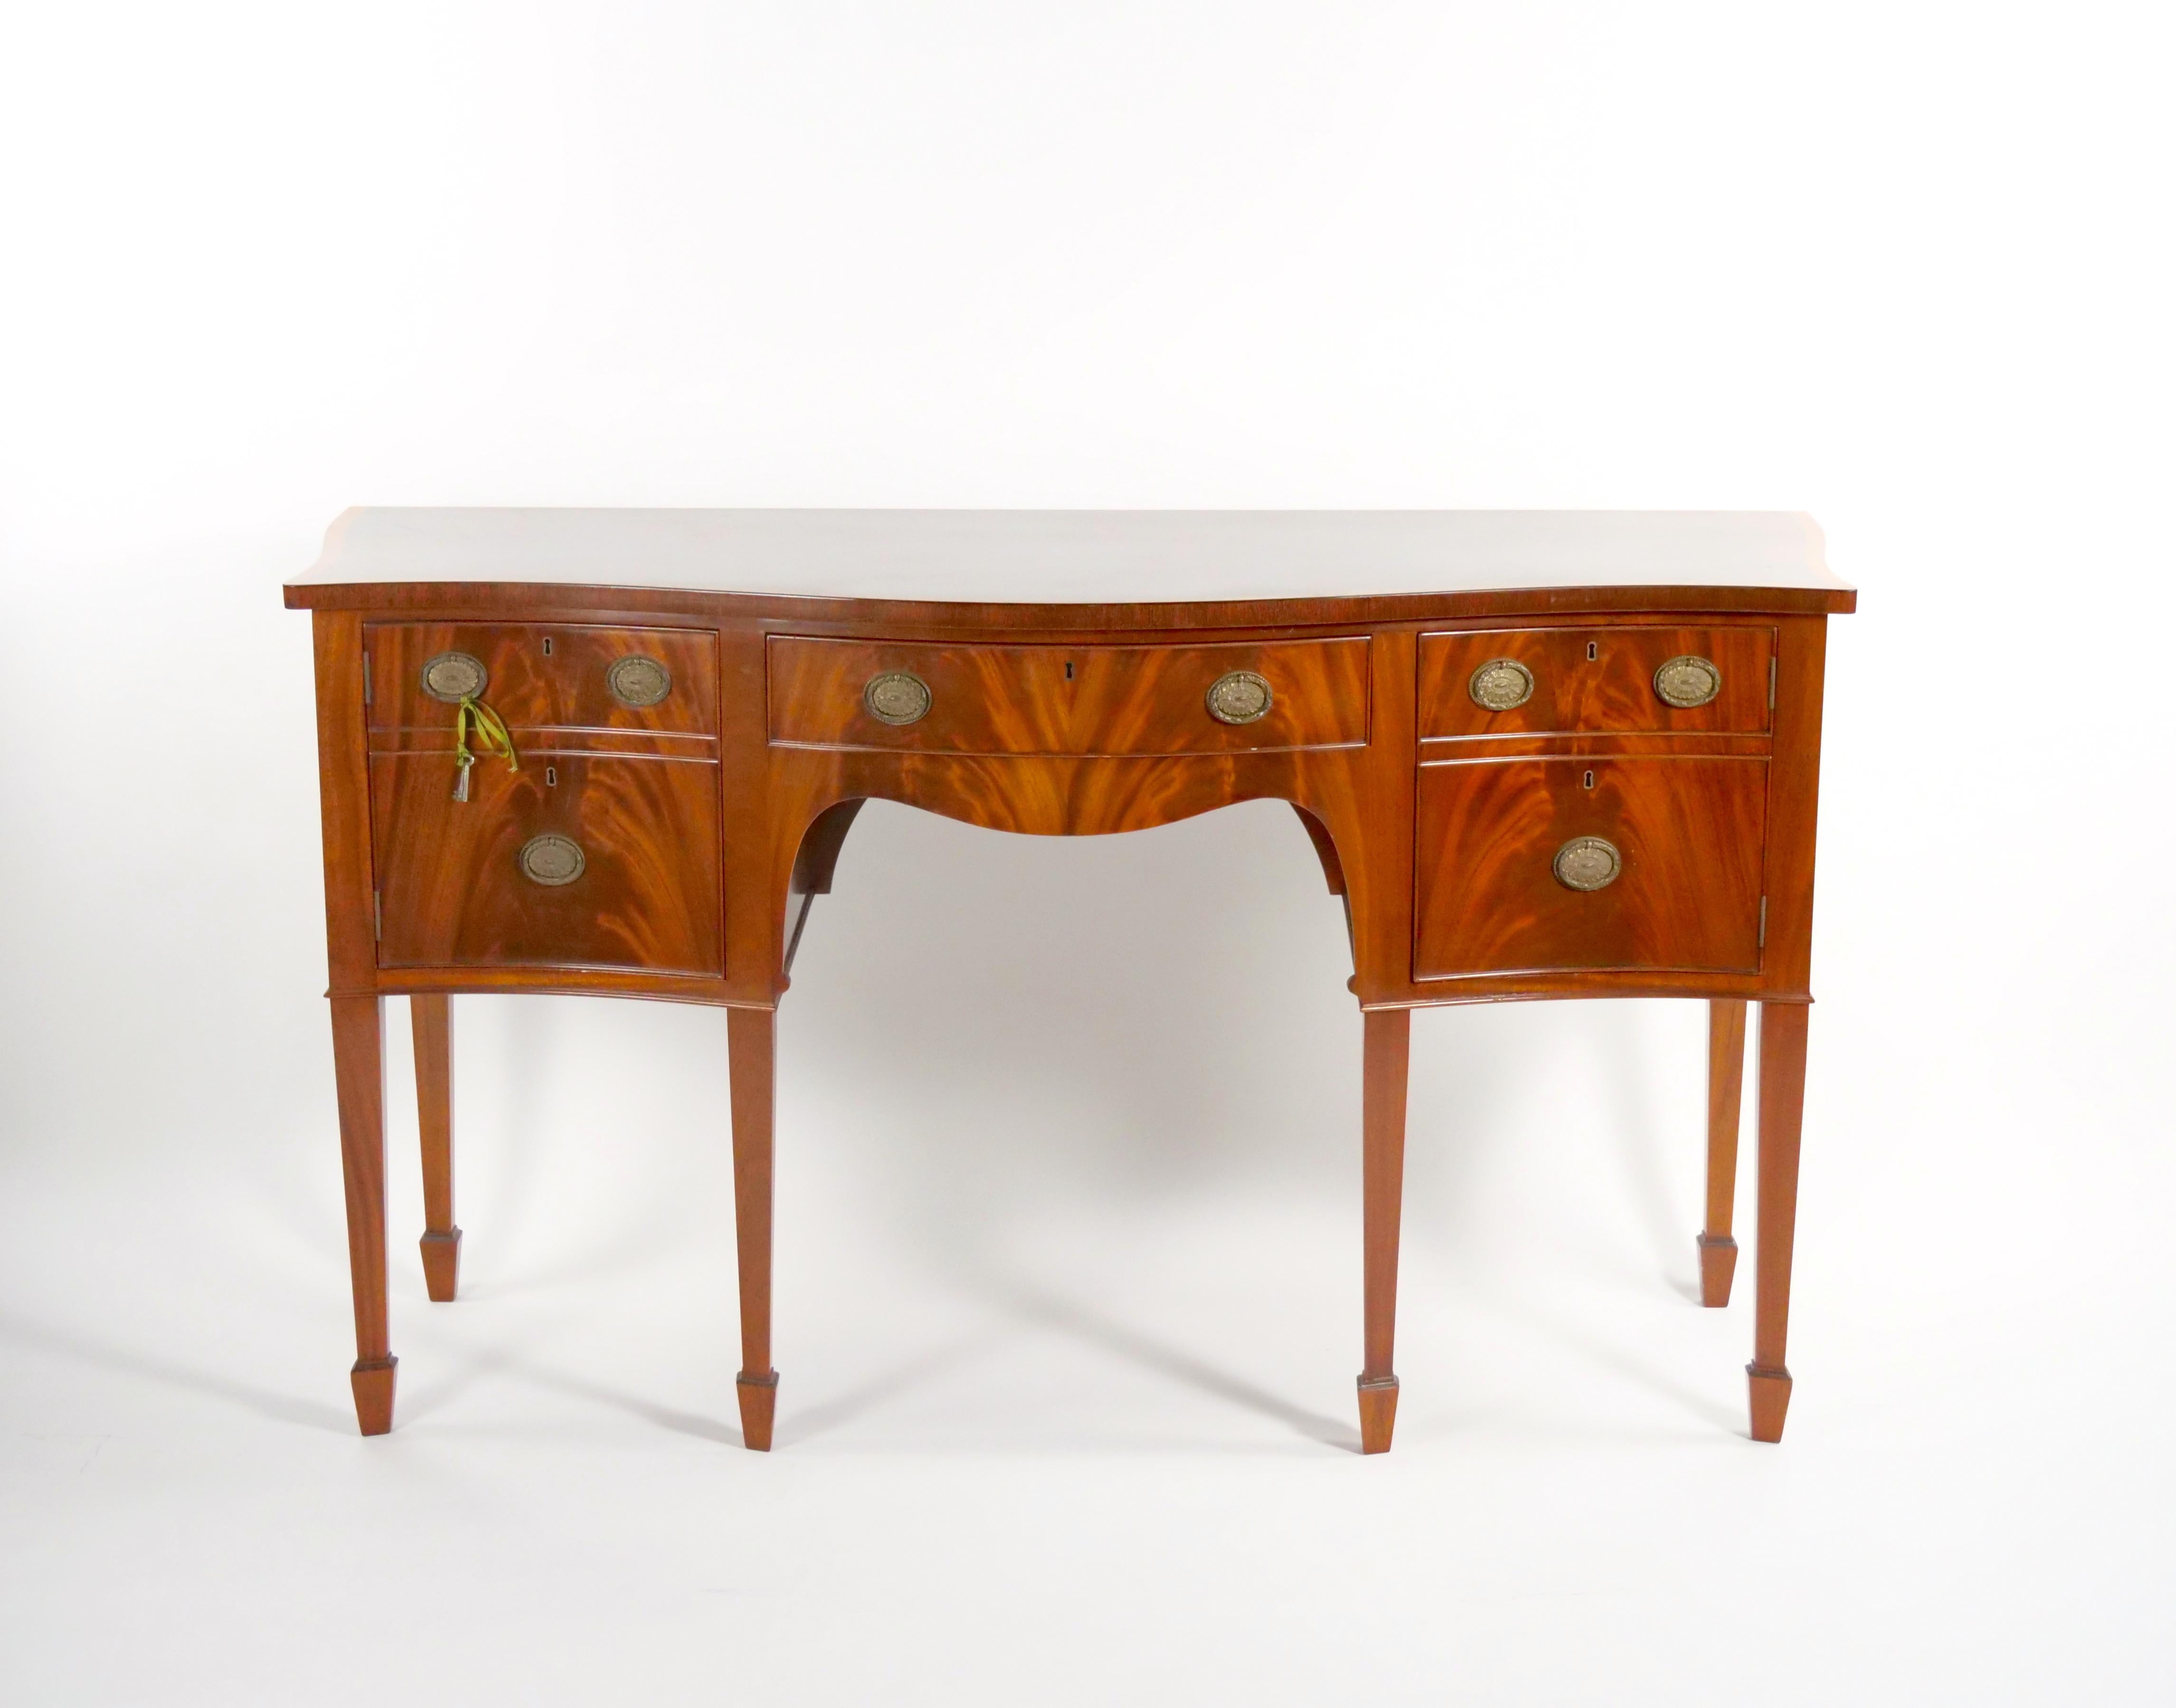 Early 20th Century George III Flame Mahogany Serpentine Sideboard / Server For Sale 7